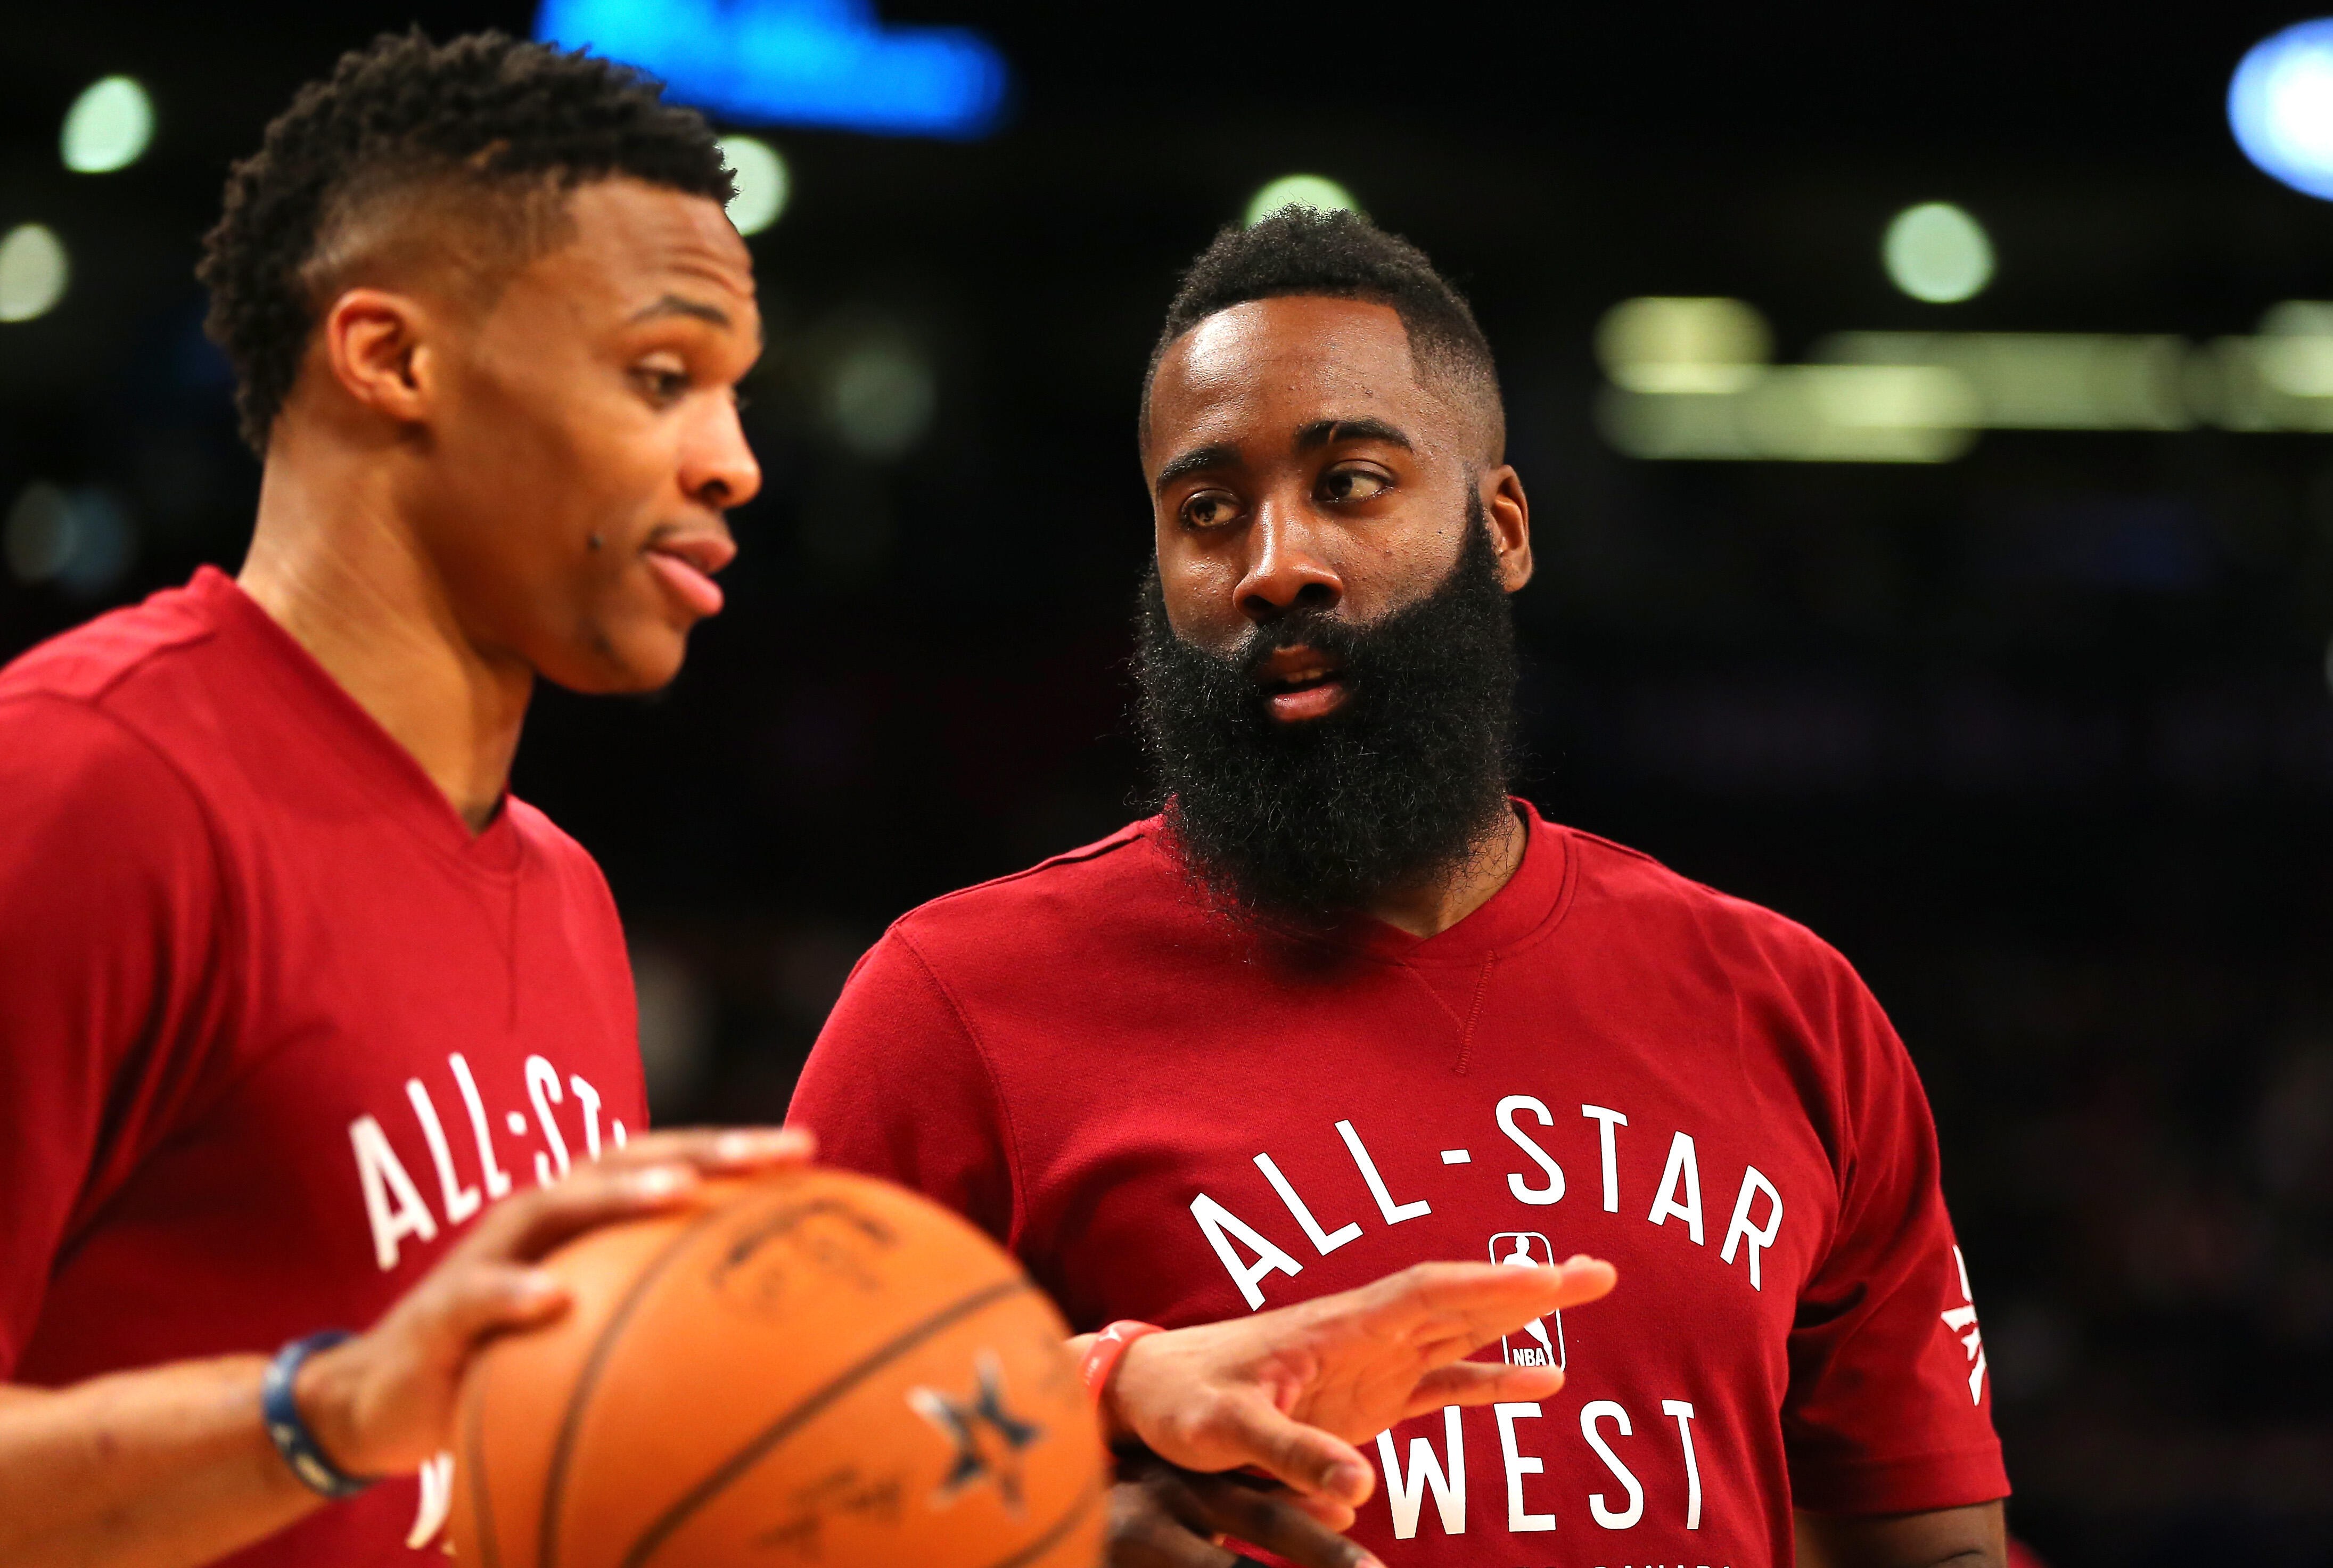 TORONTO, ON - FEBRUARY 14: Russell Westbrook #0 of the Oklahoma City Thunder and the Western Conference and James Harden #13 of the Houston Rockets and the Western Conference warm up before the NBA All-Star Game 2016 at the Air Canada Centre on February 1